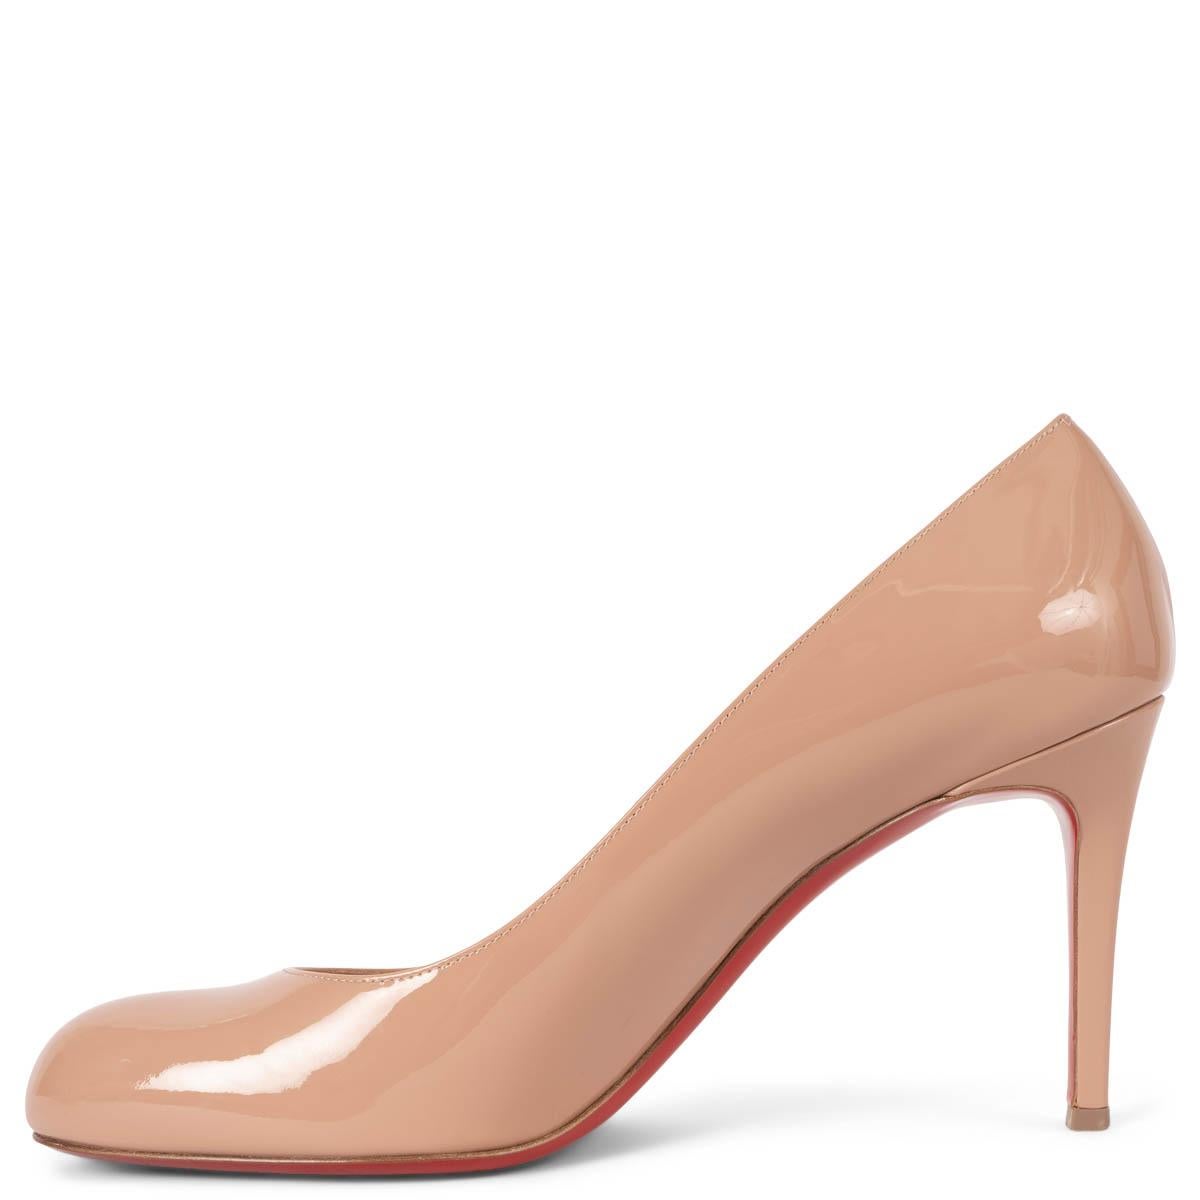 Women's CHRISTIAN LOUBOUTIN nude patent leather SIMPLE PUMP 85 Pumps Shoes 40.5 fit 40 For Sale